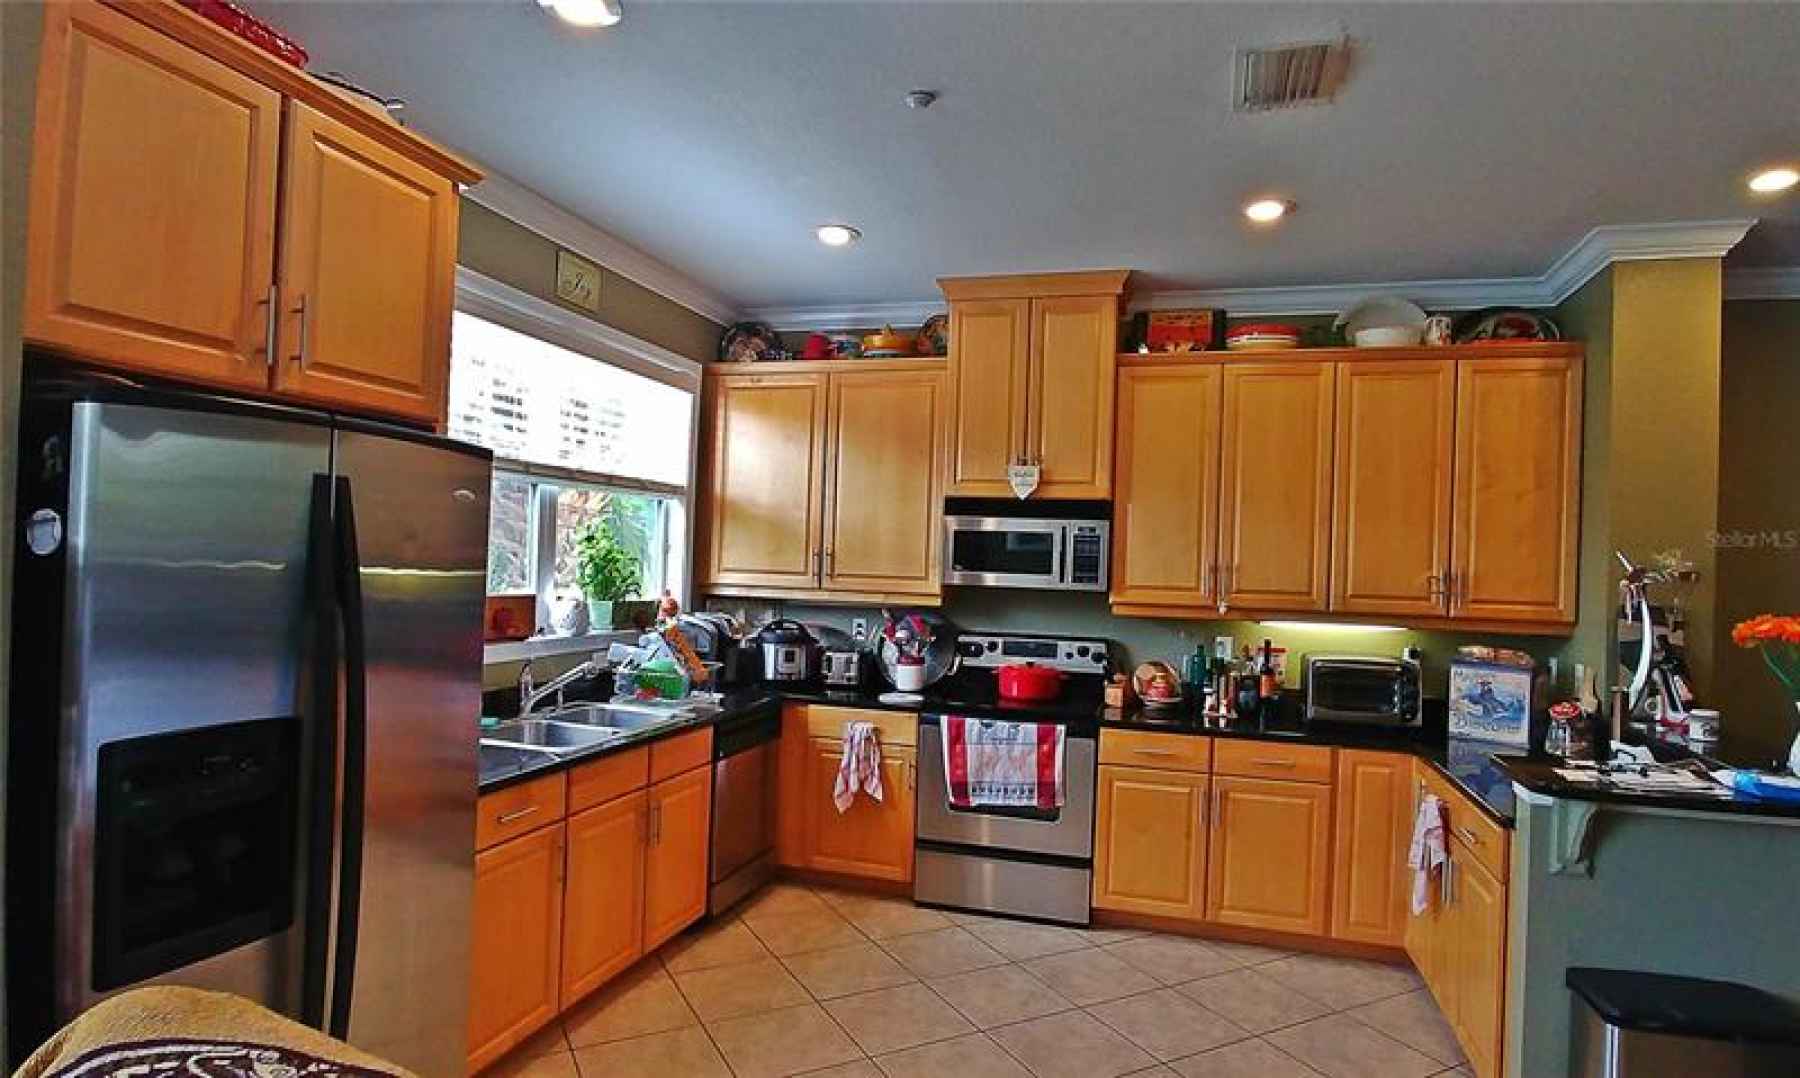 Large, fully-equipped kitchen with granite counter tops and stainless steel appliances